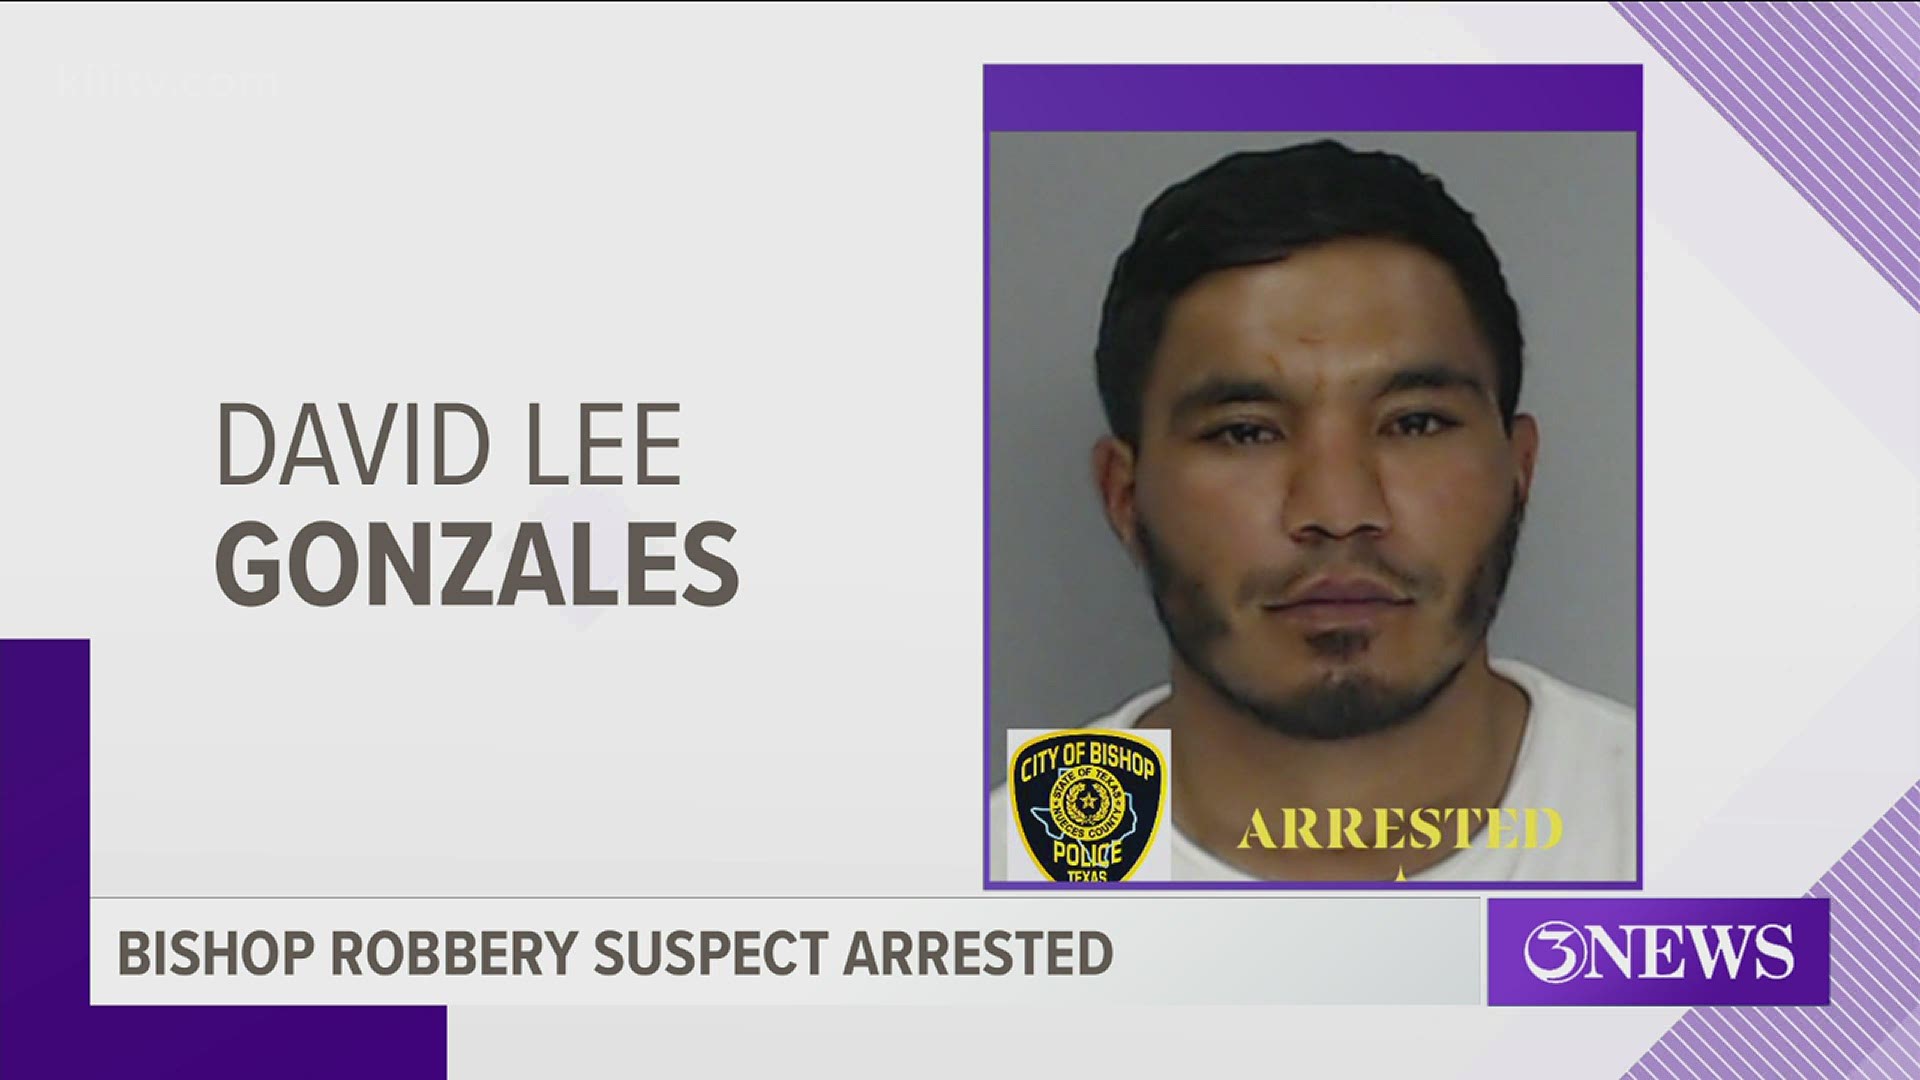 David Lee Gonzales, 30, has been charged with robbery, a 2nd-degree felony.